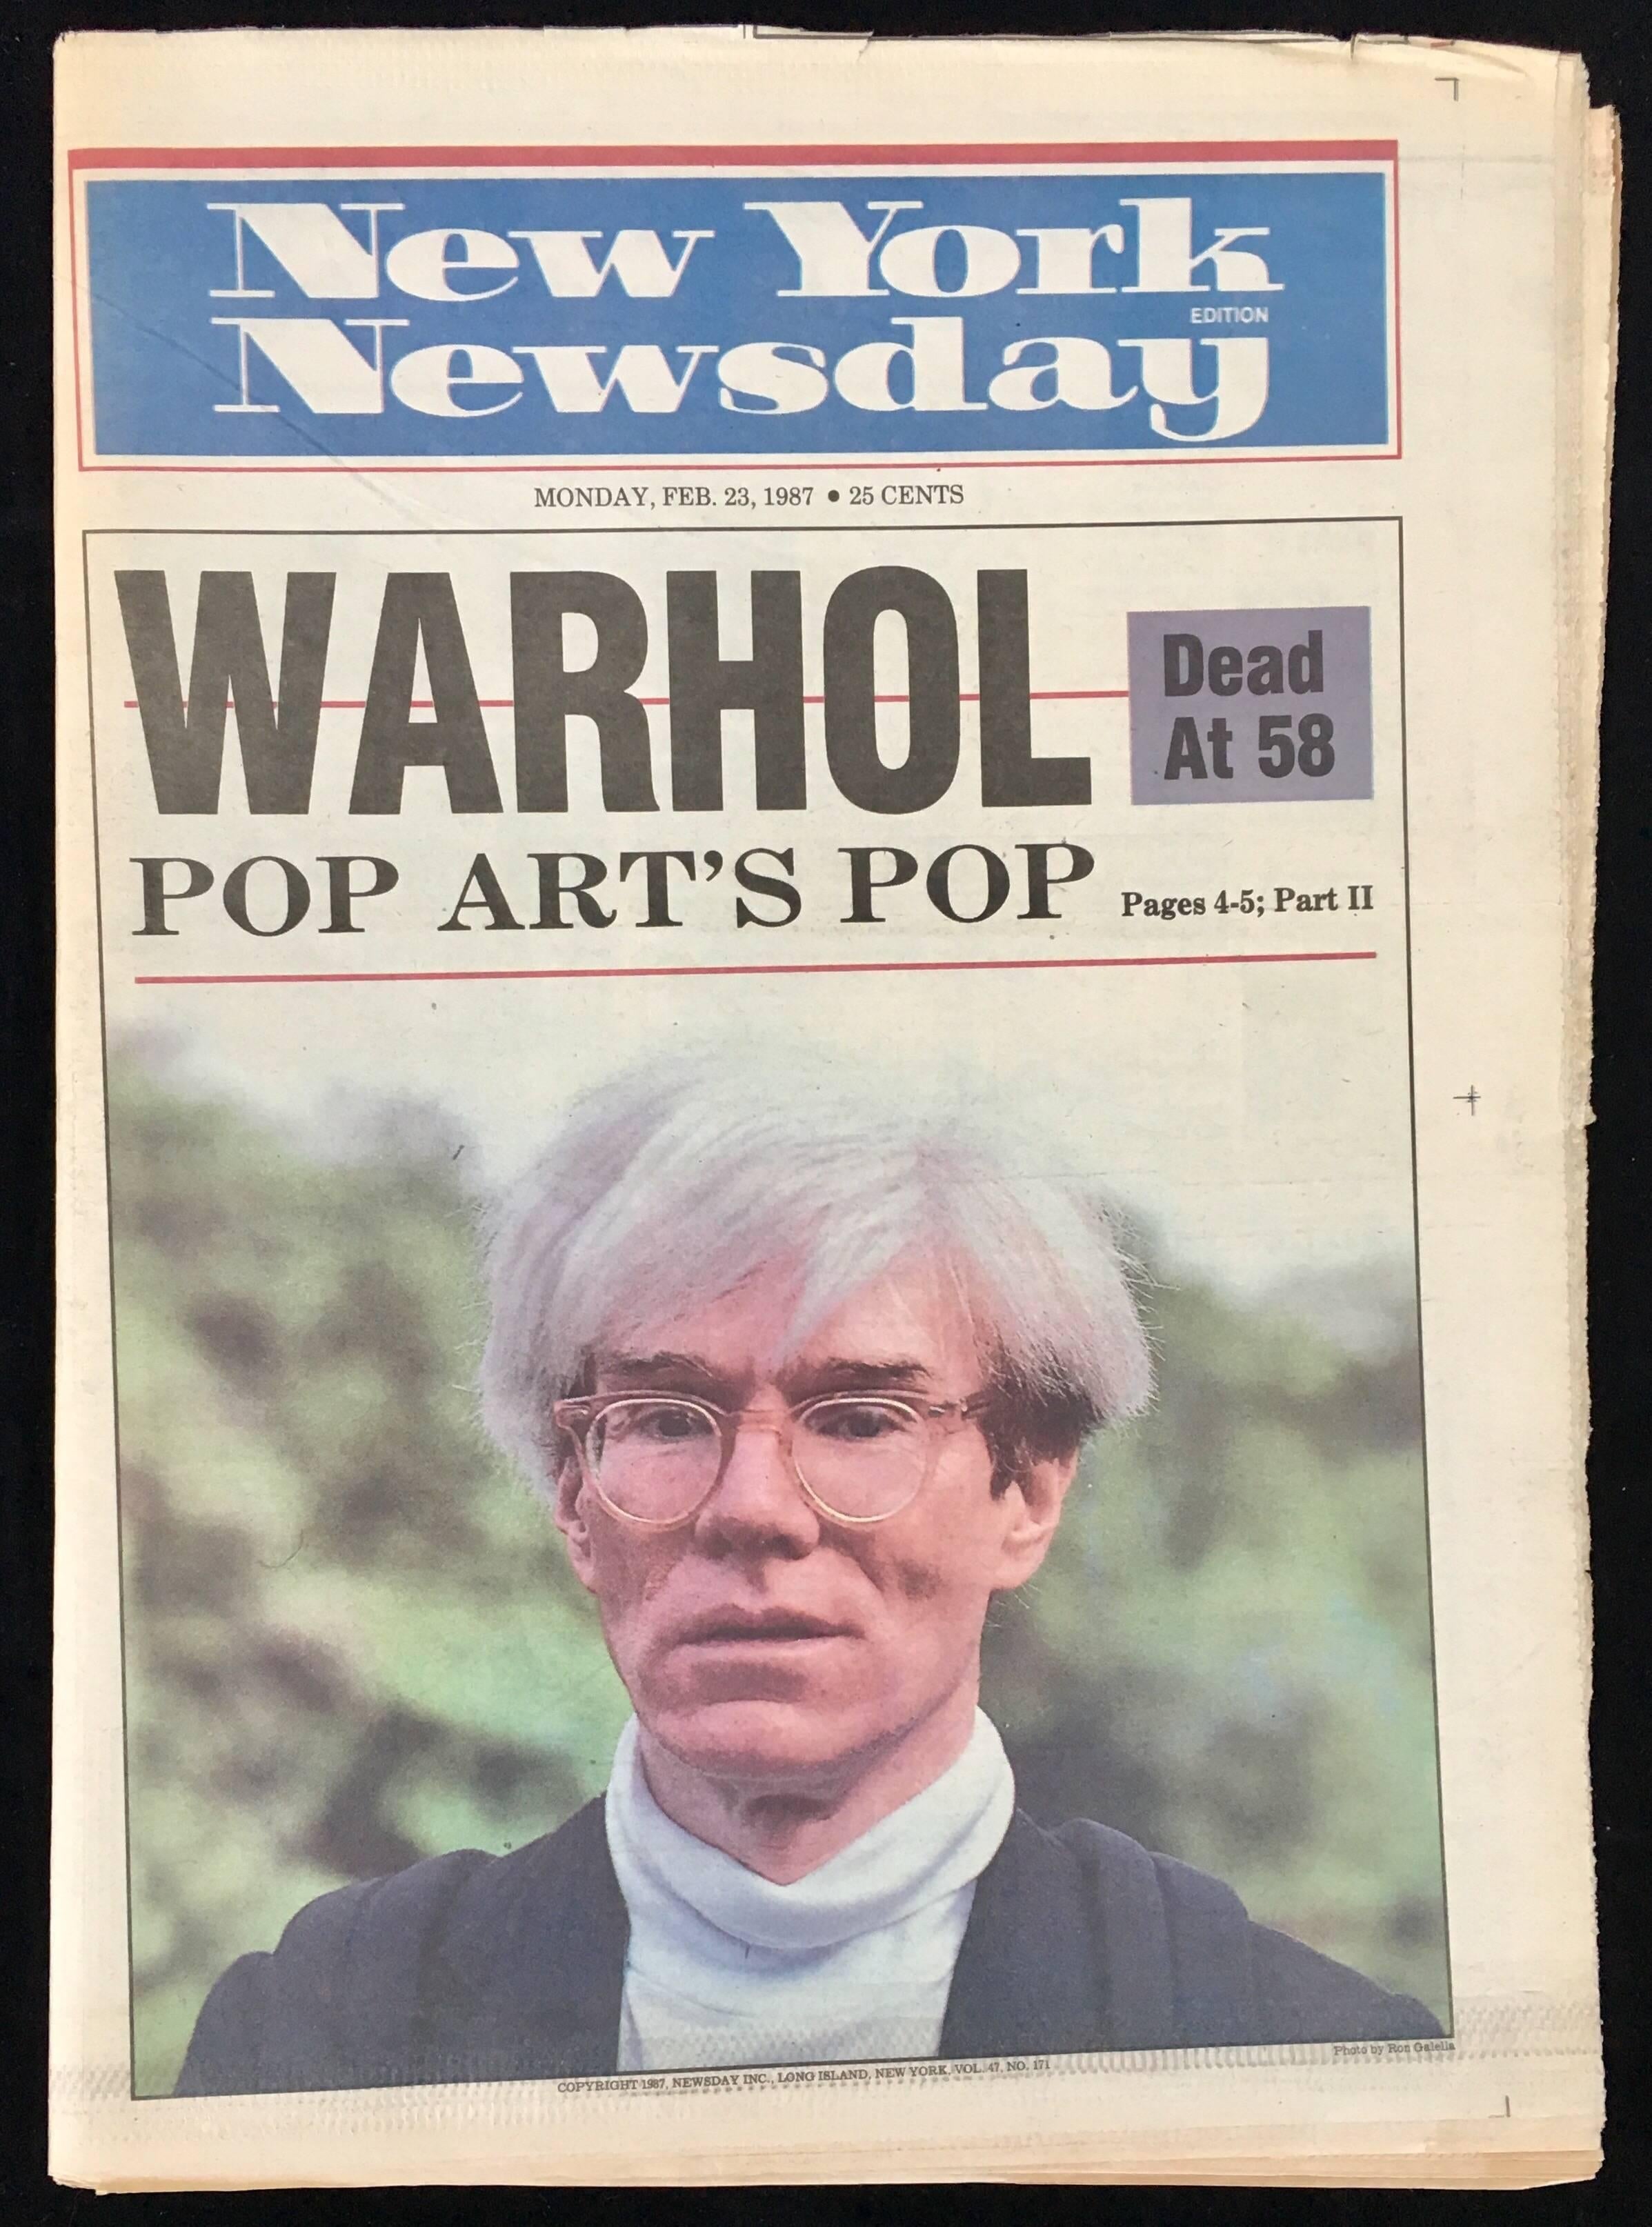 Andy Warhol Dies! Set of five 1987 NY Newspapers announcing Warhol's death - Print by (after) Andy Warhol